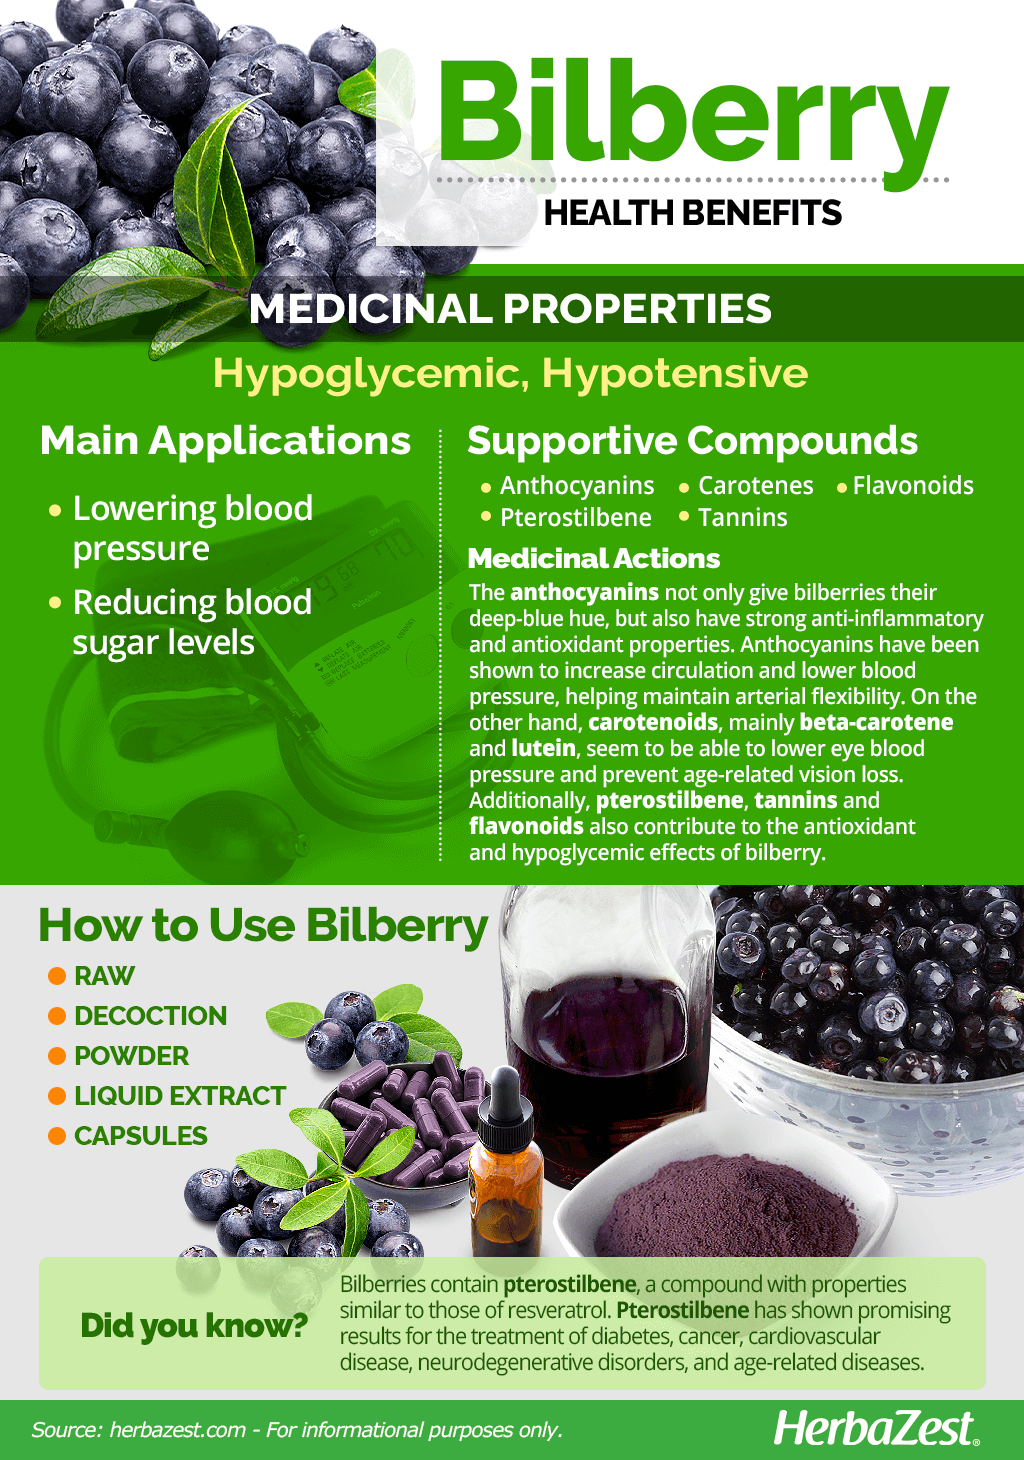 All About Bilberry